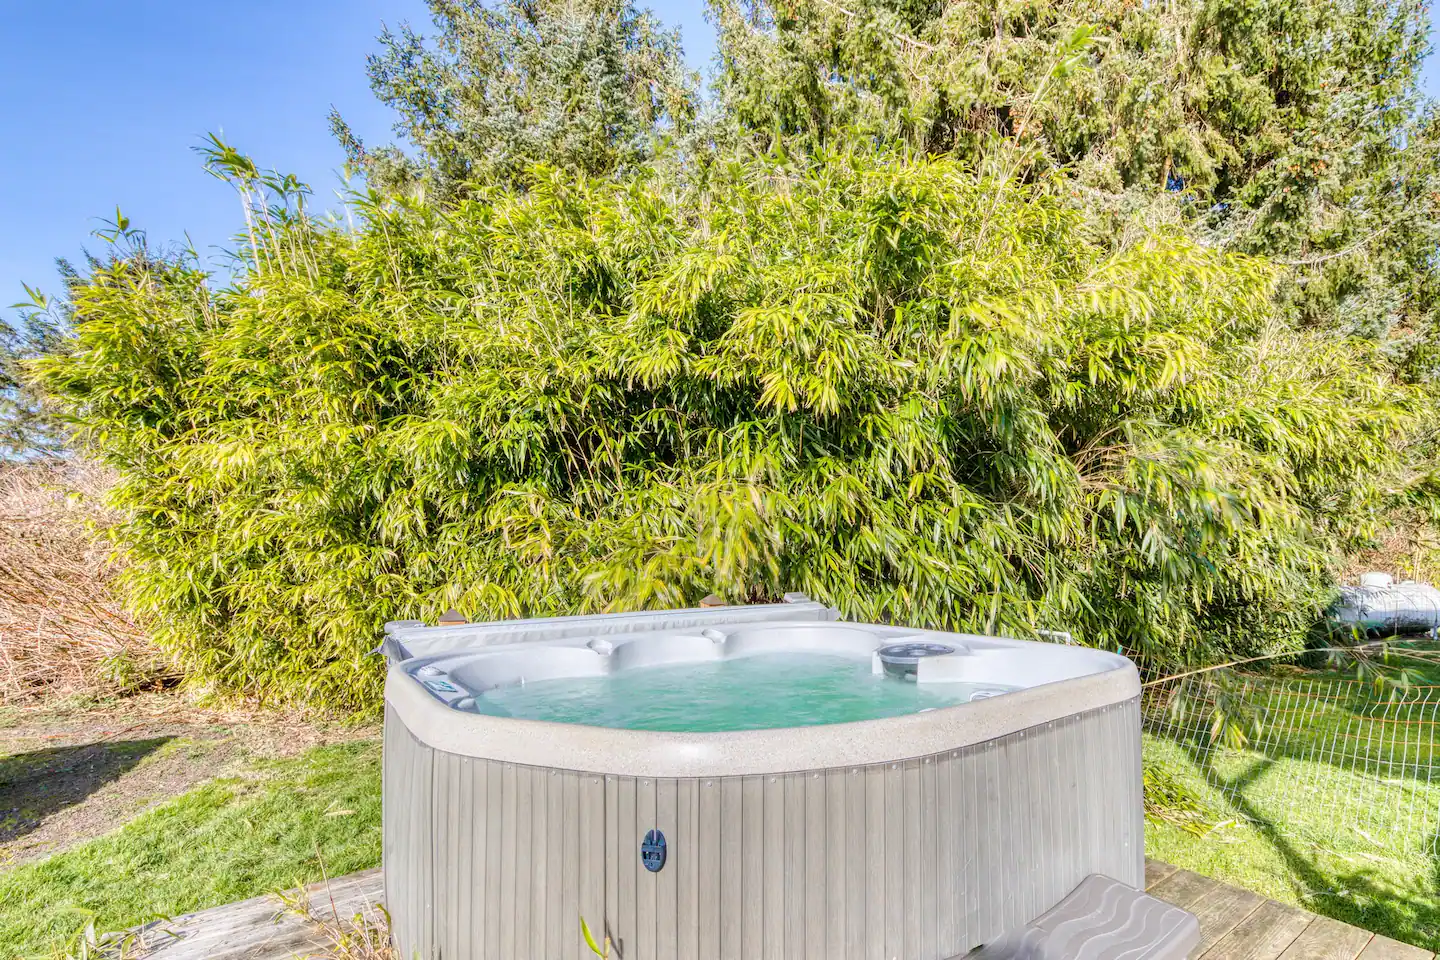 Enjoy quick dip in the jacuzzi outside